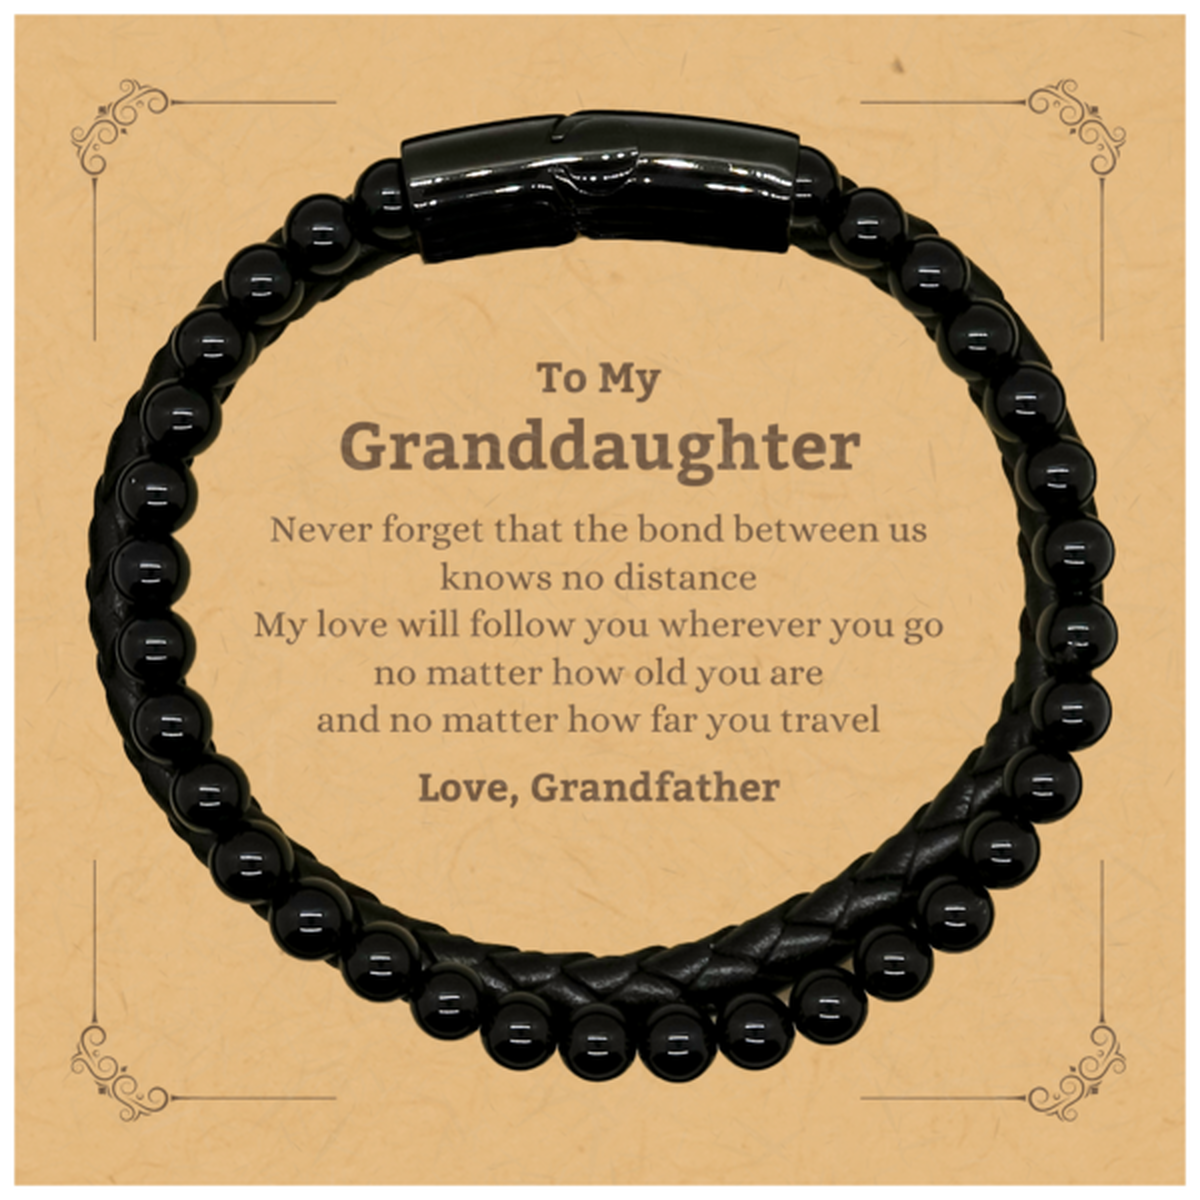 Granddaughter Birthday Gifts from Grandfather, Adjustable Stone Leather Bracelets for Granddaughter Christmas Graduation Unique Gifts Granddaughter Never forget that the bond between us knows no distance. Love, Grandfather